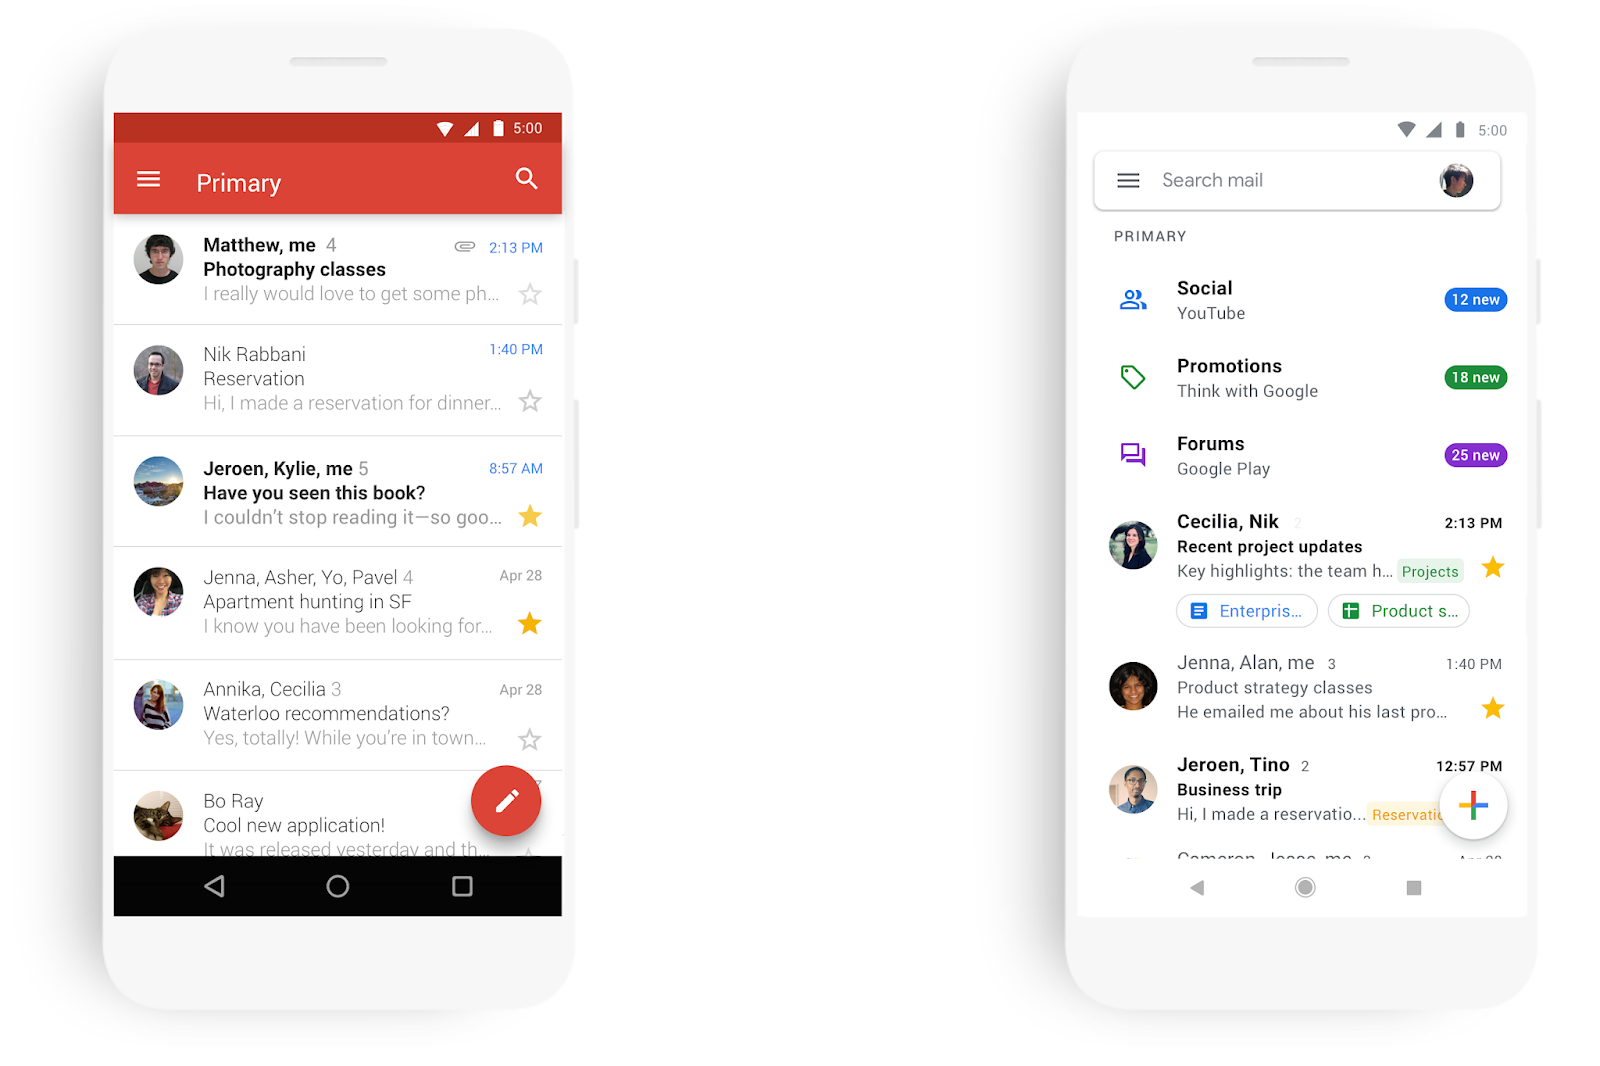 Interface comparison between old gmail and new gmail app